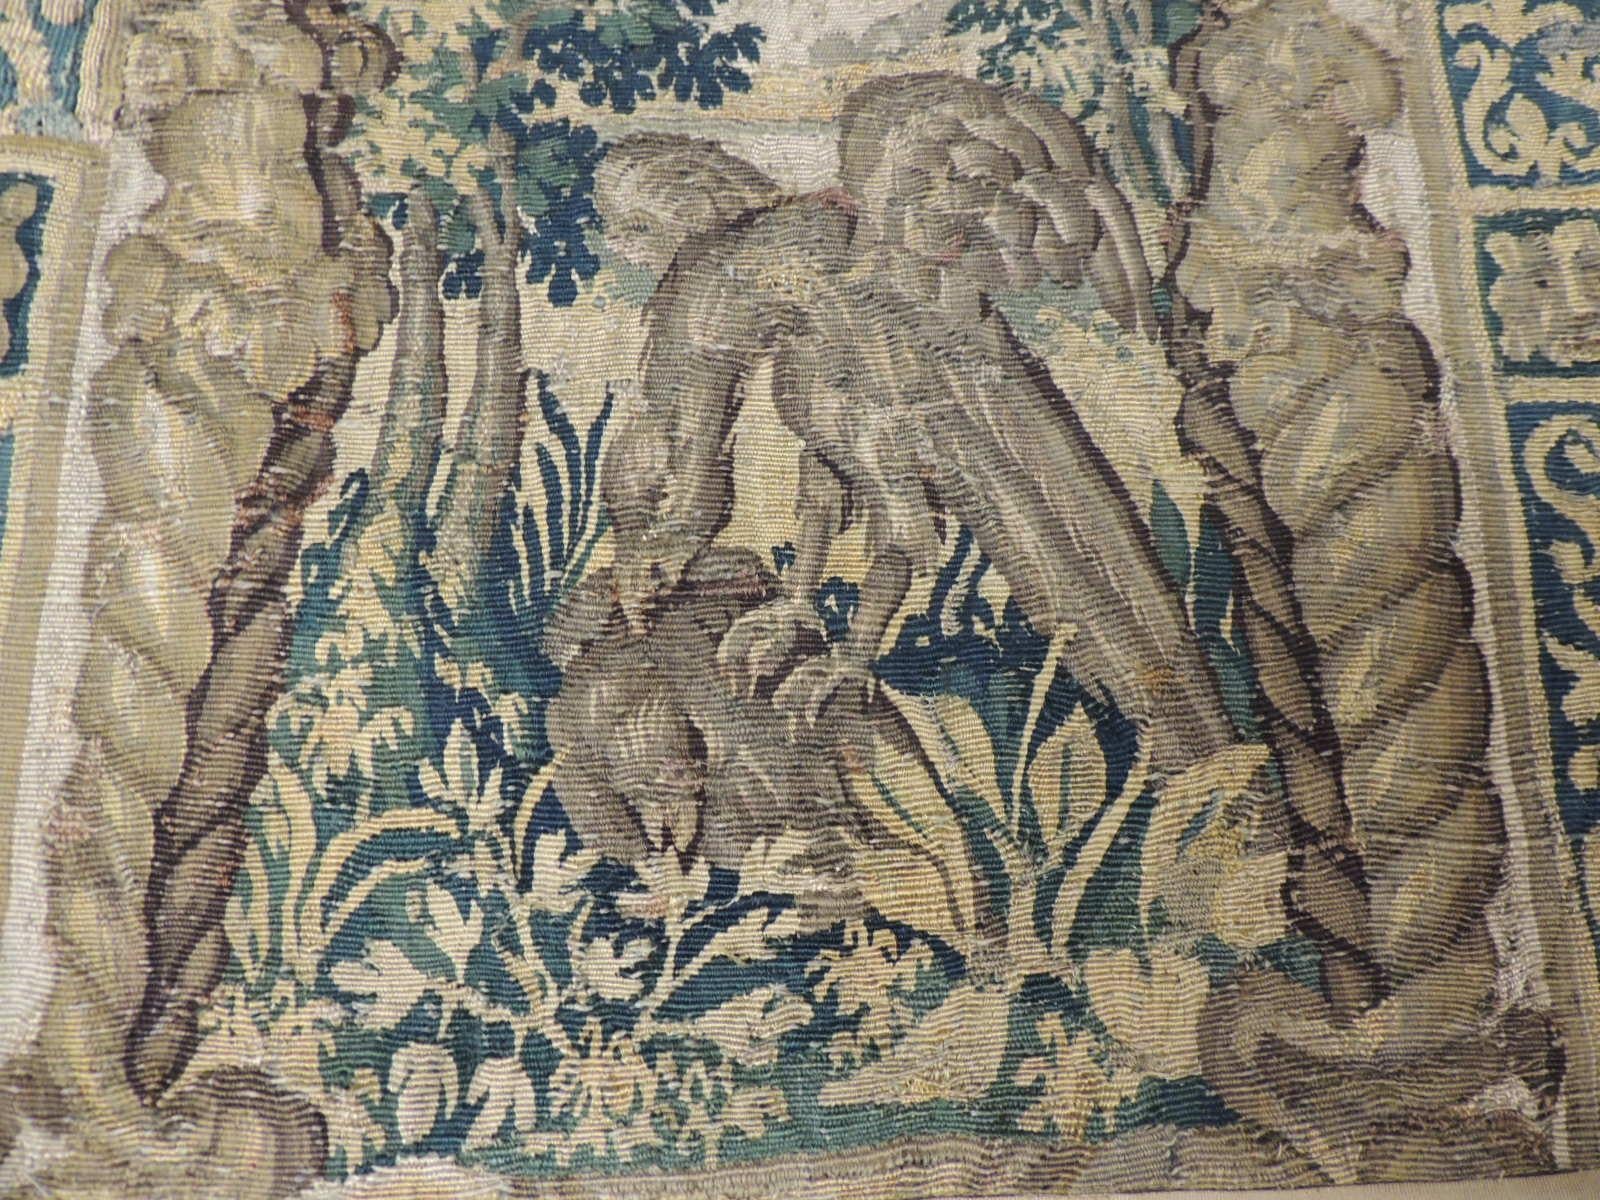 19th century green and gold verdure tapestry fragment, depicting an architectural arch with the forest in the background. A bird of pray in the center.
Framed with small french ribbon all around and backed with linen.
